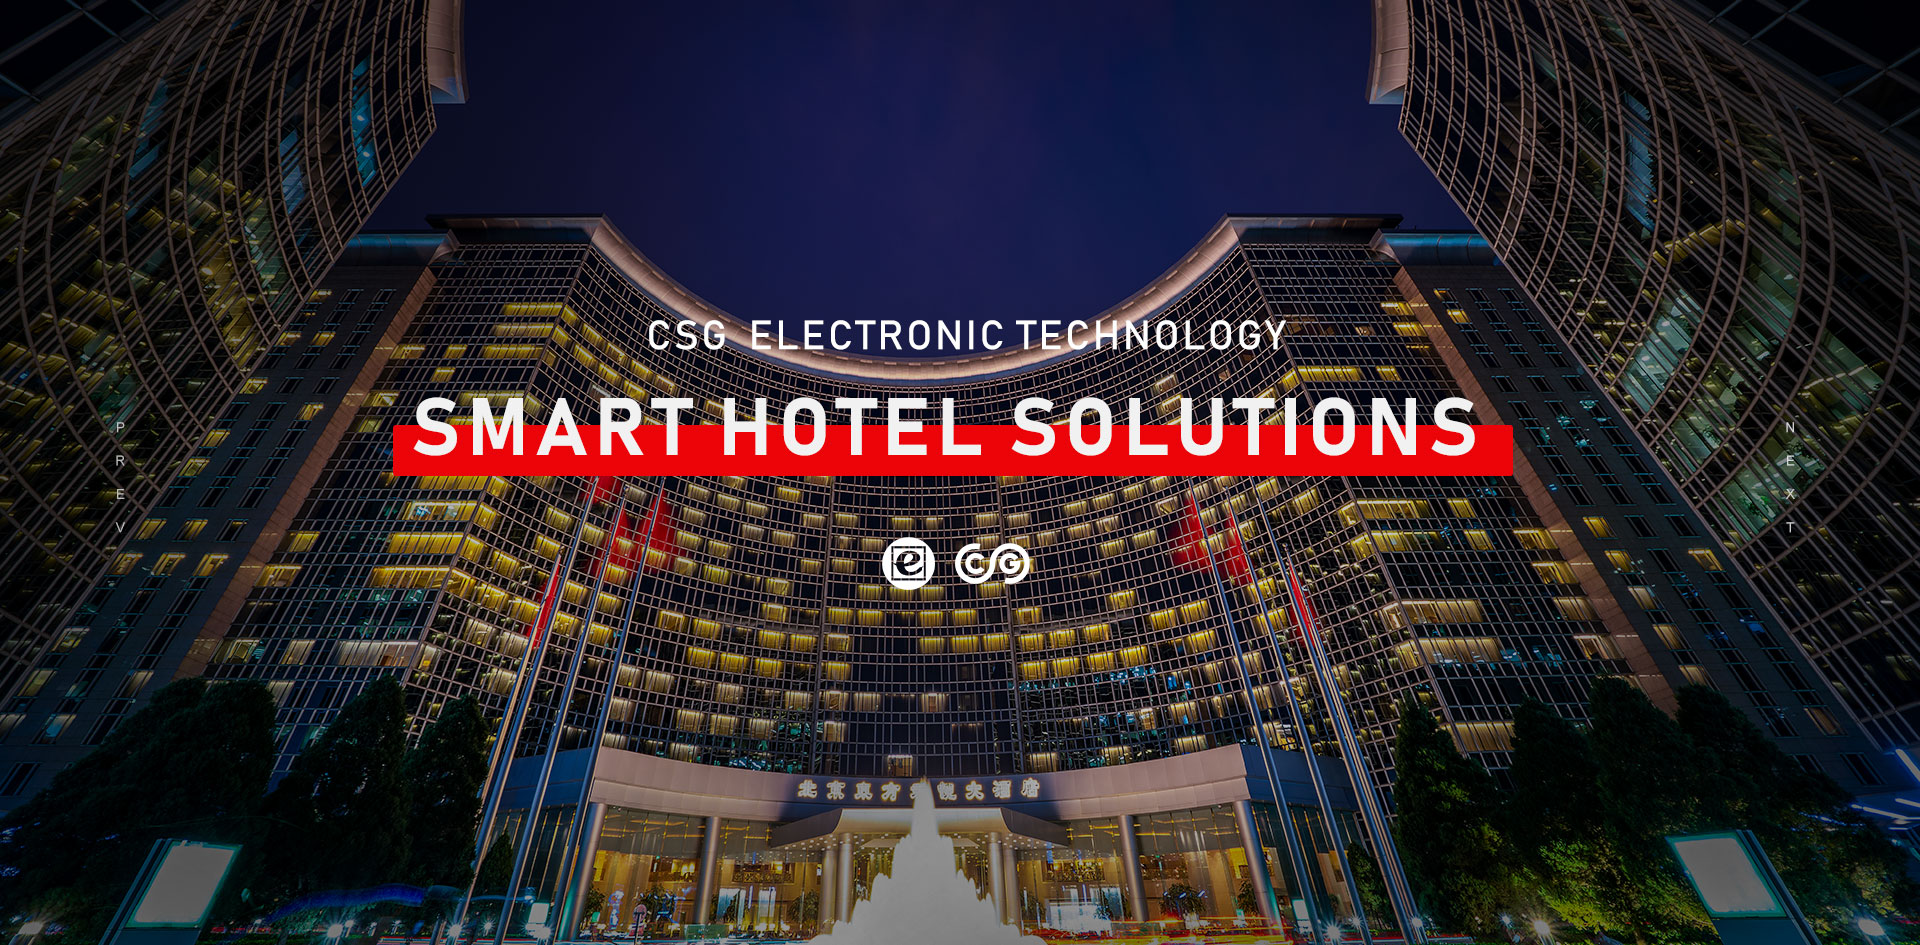 Smart hotel solutions